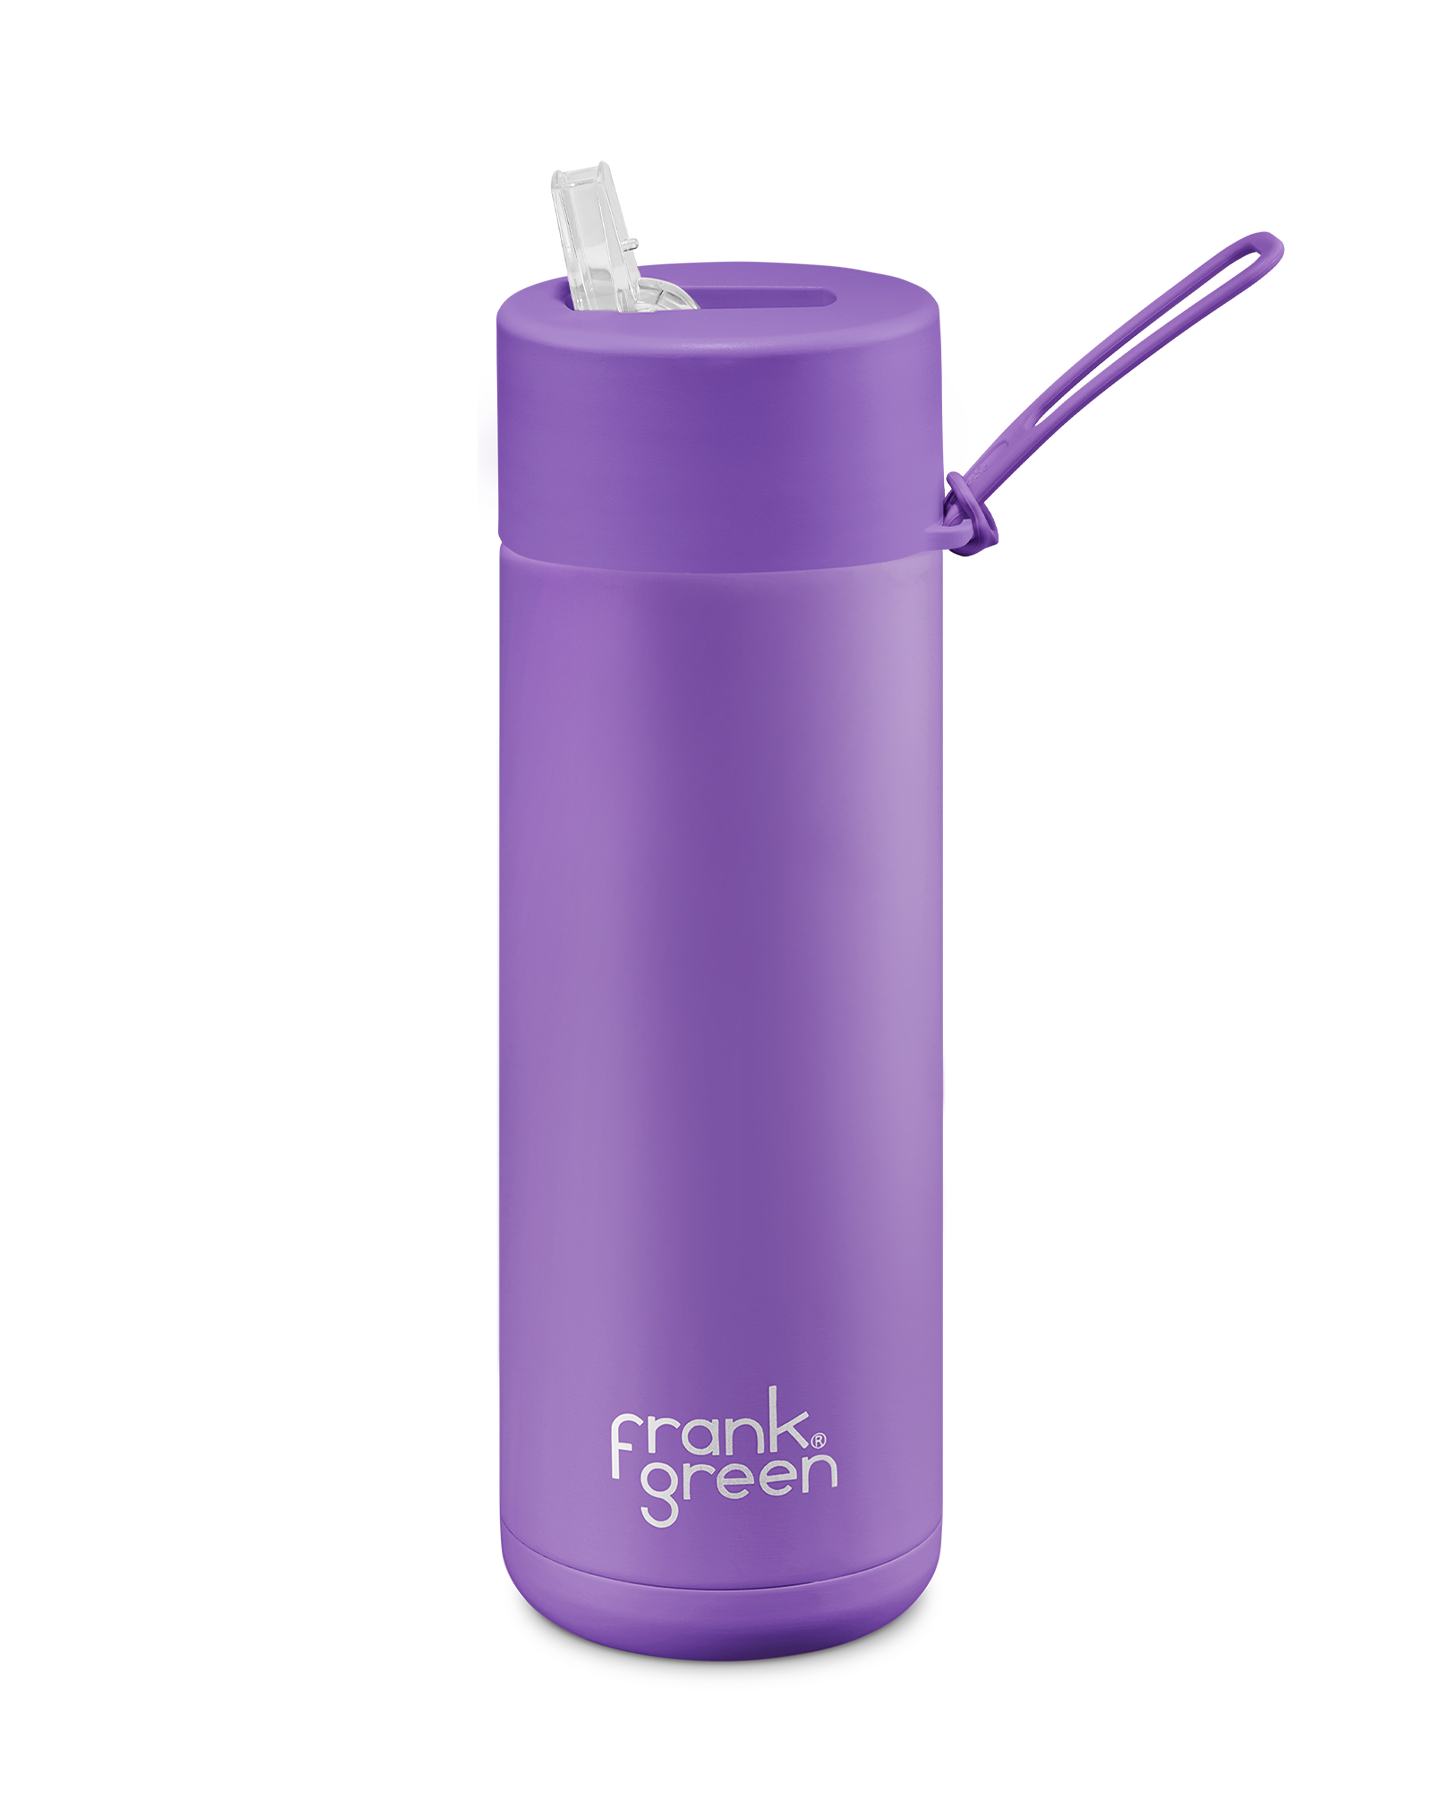 FRANK GREEN CERAMIC REUSABLE DRINK BOTTLE 20oz WITH STRAW LID - COSMIC PURPLE